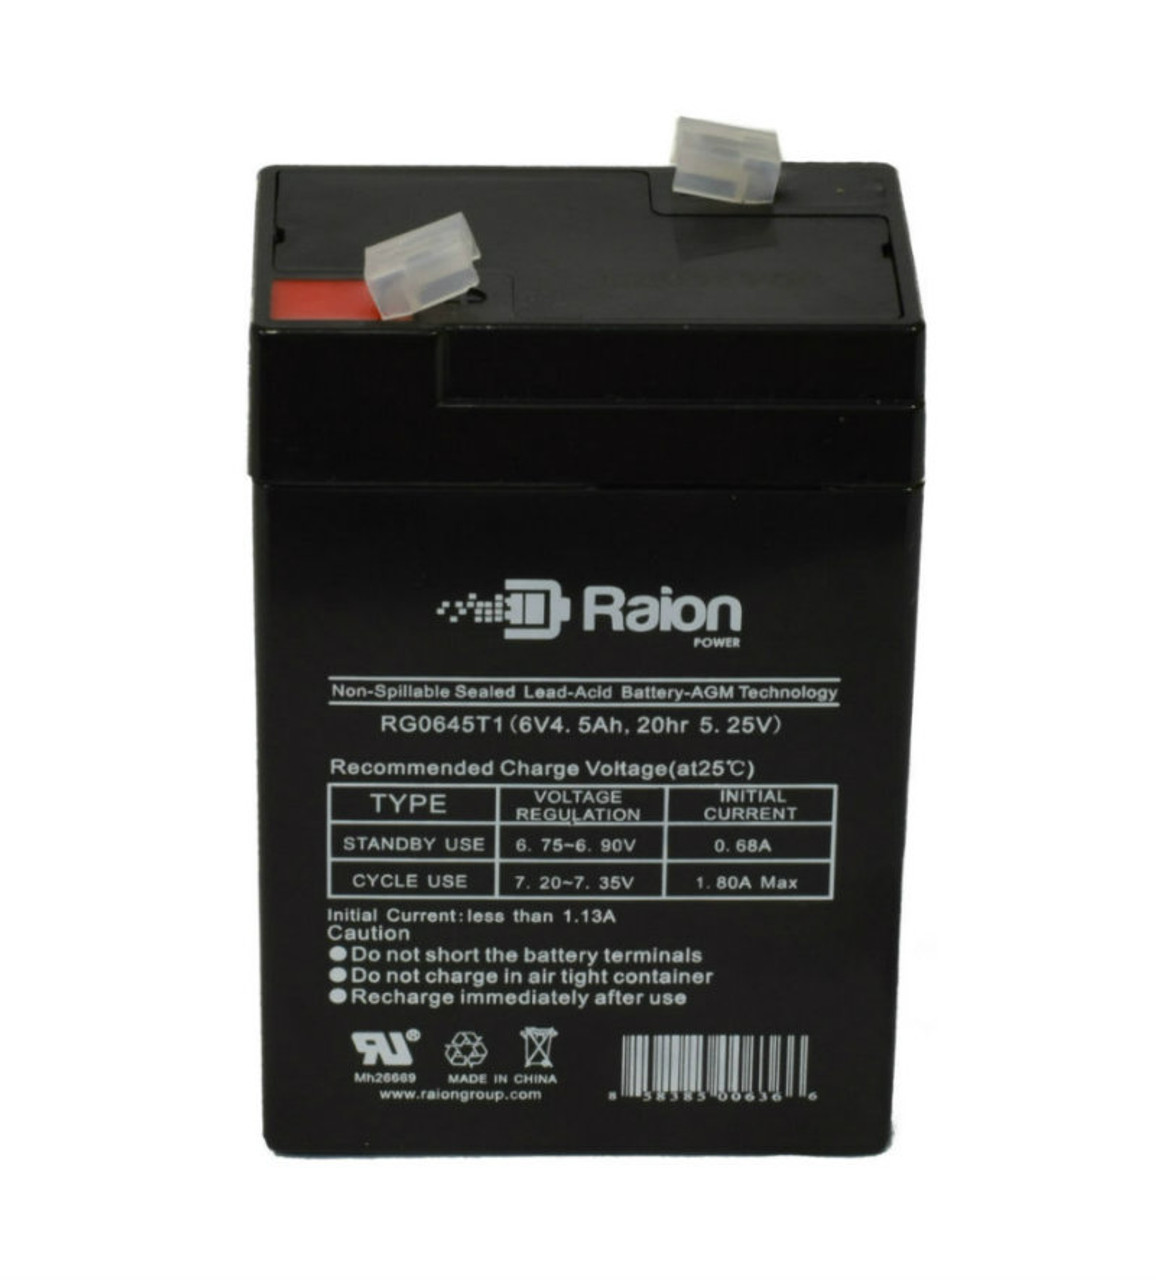 Raion Power RG0645T1 Replacement Battery Cartridge for Big Beam 2IQ6S50